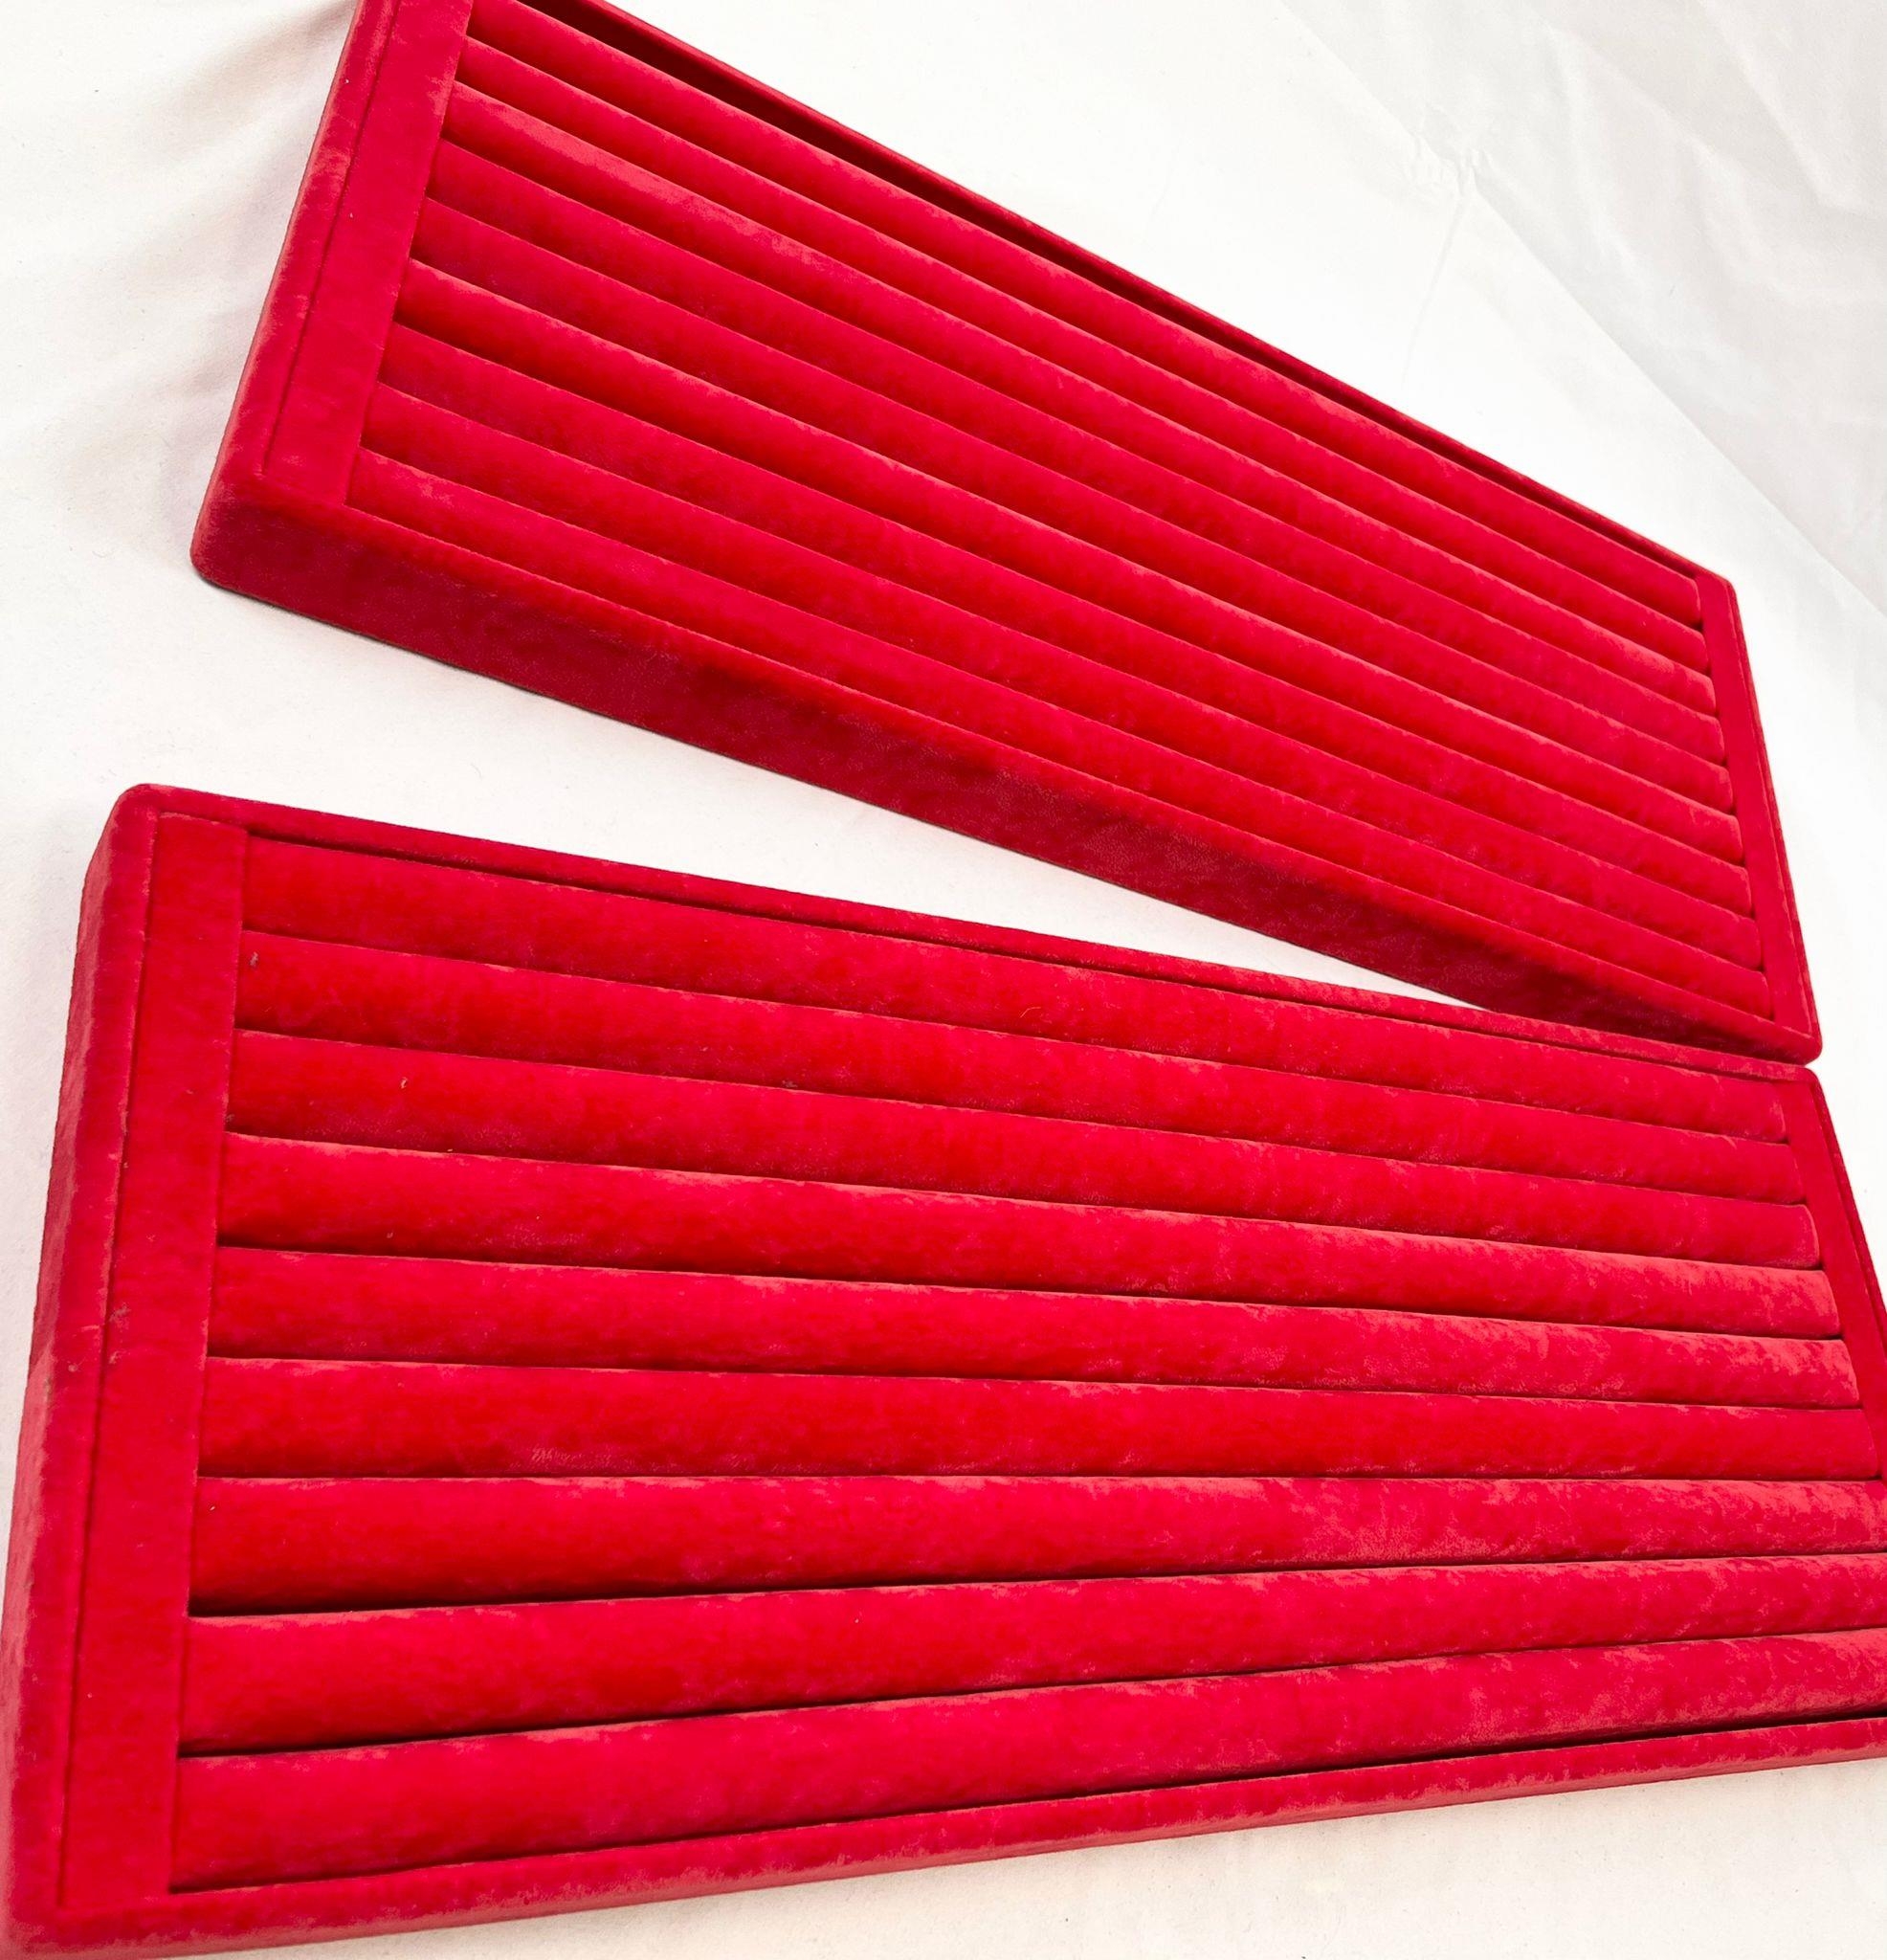 Two Large Hand-Made Ring-Holder Trays in Red Velvet. Each tray capable of holding 250 rings. - Image 2 of 3